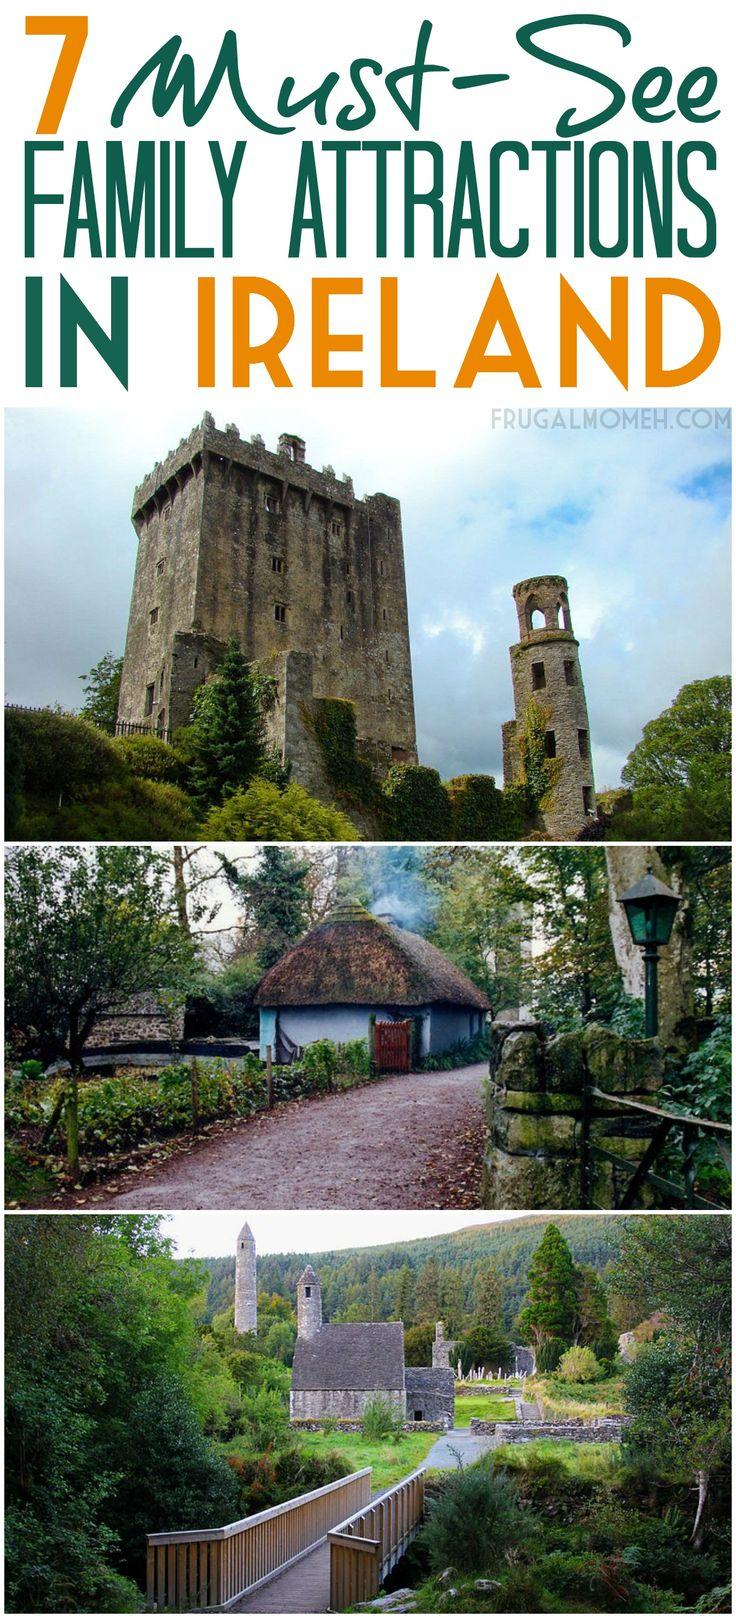 Wedding - 7 Must-See Family Attractions In Ireland - Frugal Mom Eh!